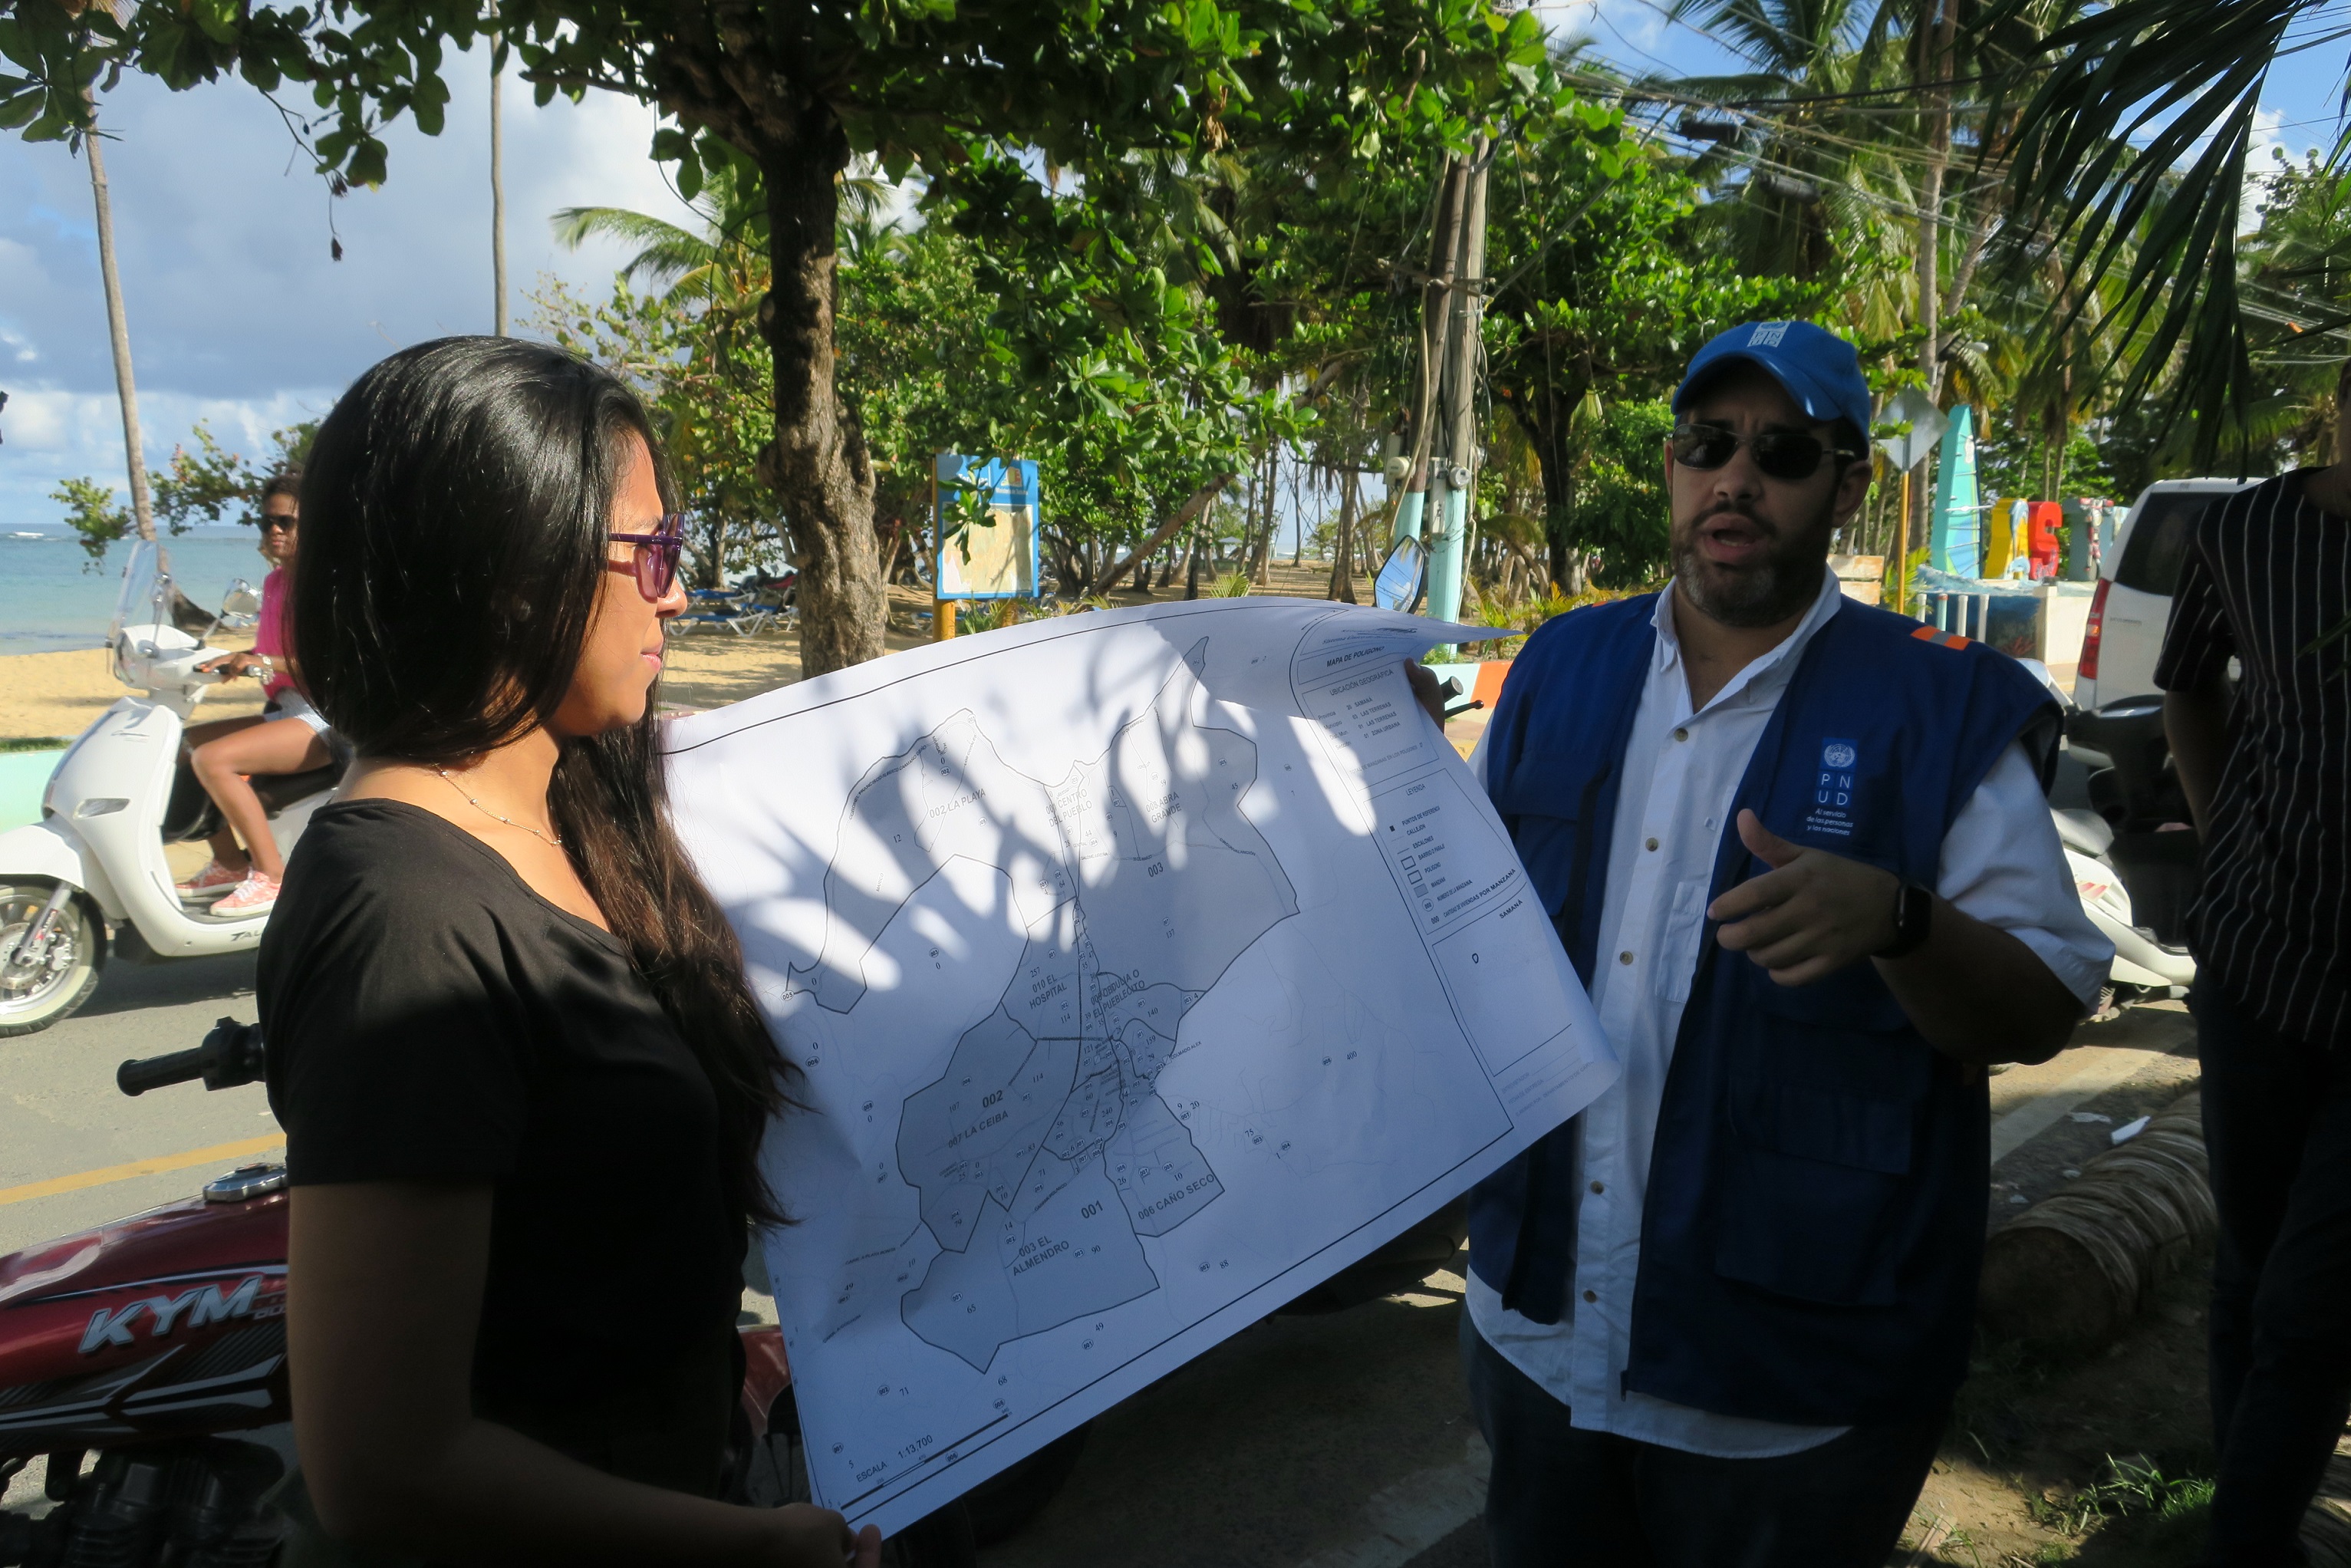 A woman and man look at map of affected area